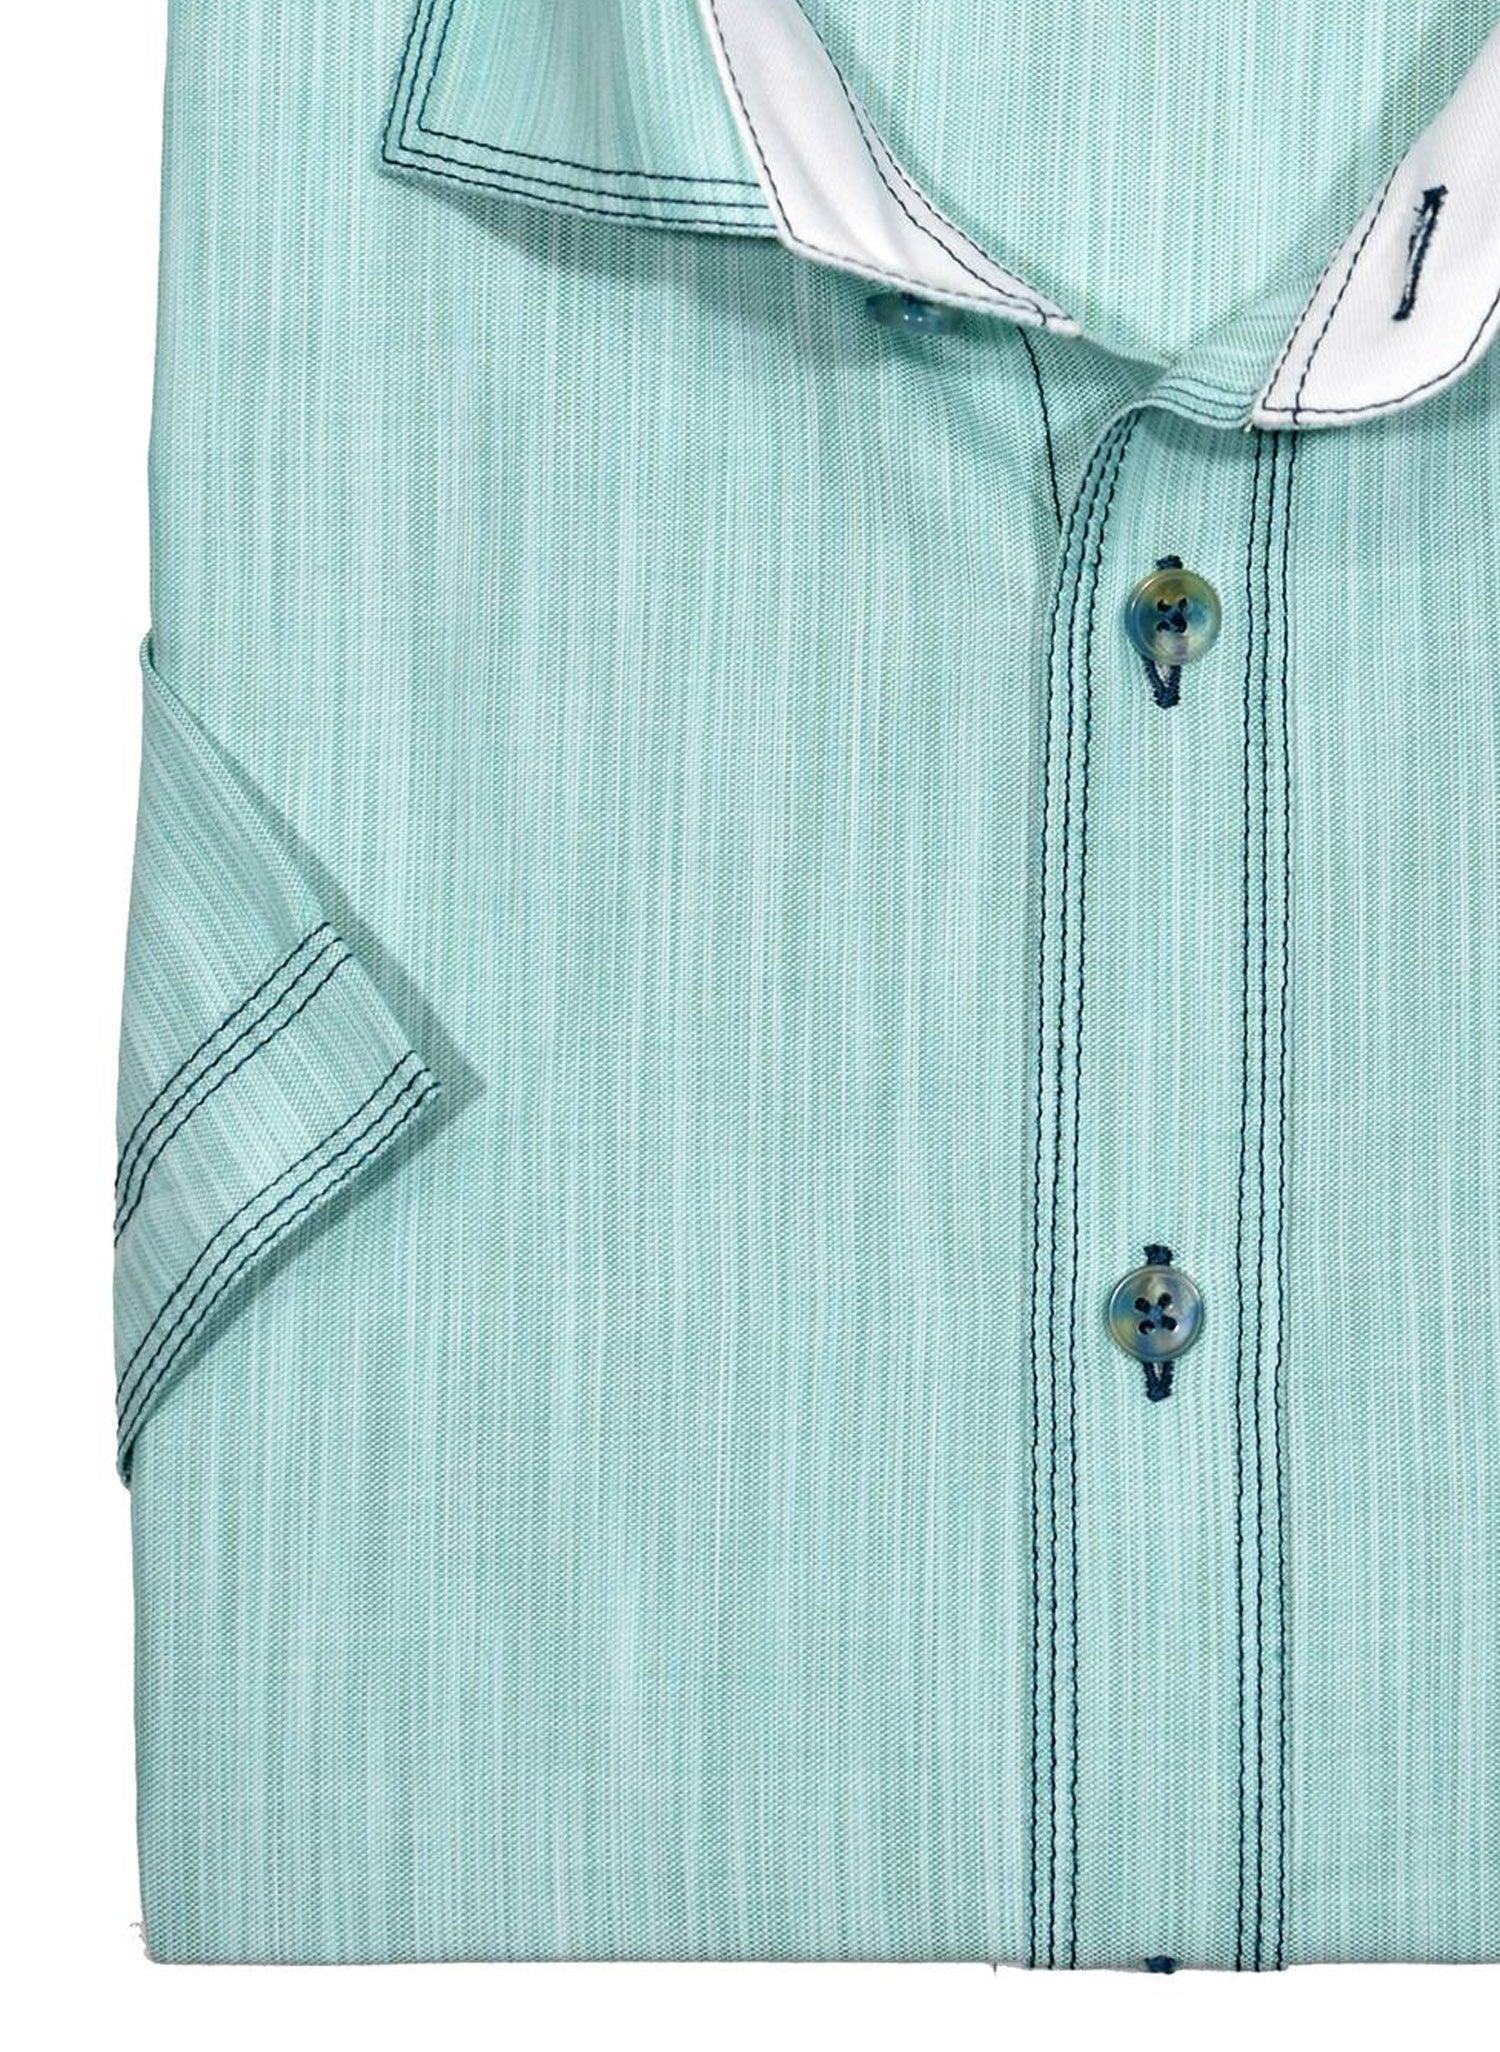 Marcello Sport classic short sleeve cotton linen fabric is crafted to reduce wrinkling.  The shirt features our signature triple stitch detailing, matched buttons and complimentary trim fabrics.  Soft cotton blended fabric, woven to look like linen. Medium spread collar for a casual sport look. Trend chest pocket. Square bottom with side slit vents. Classic shaped fit.